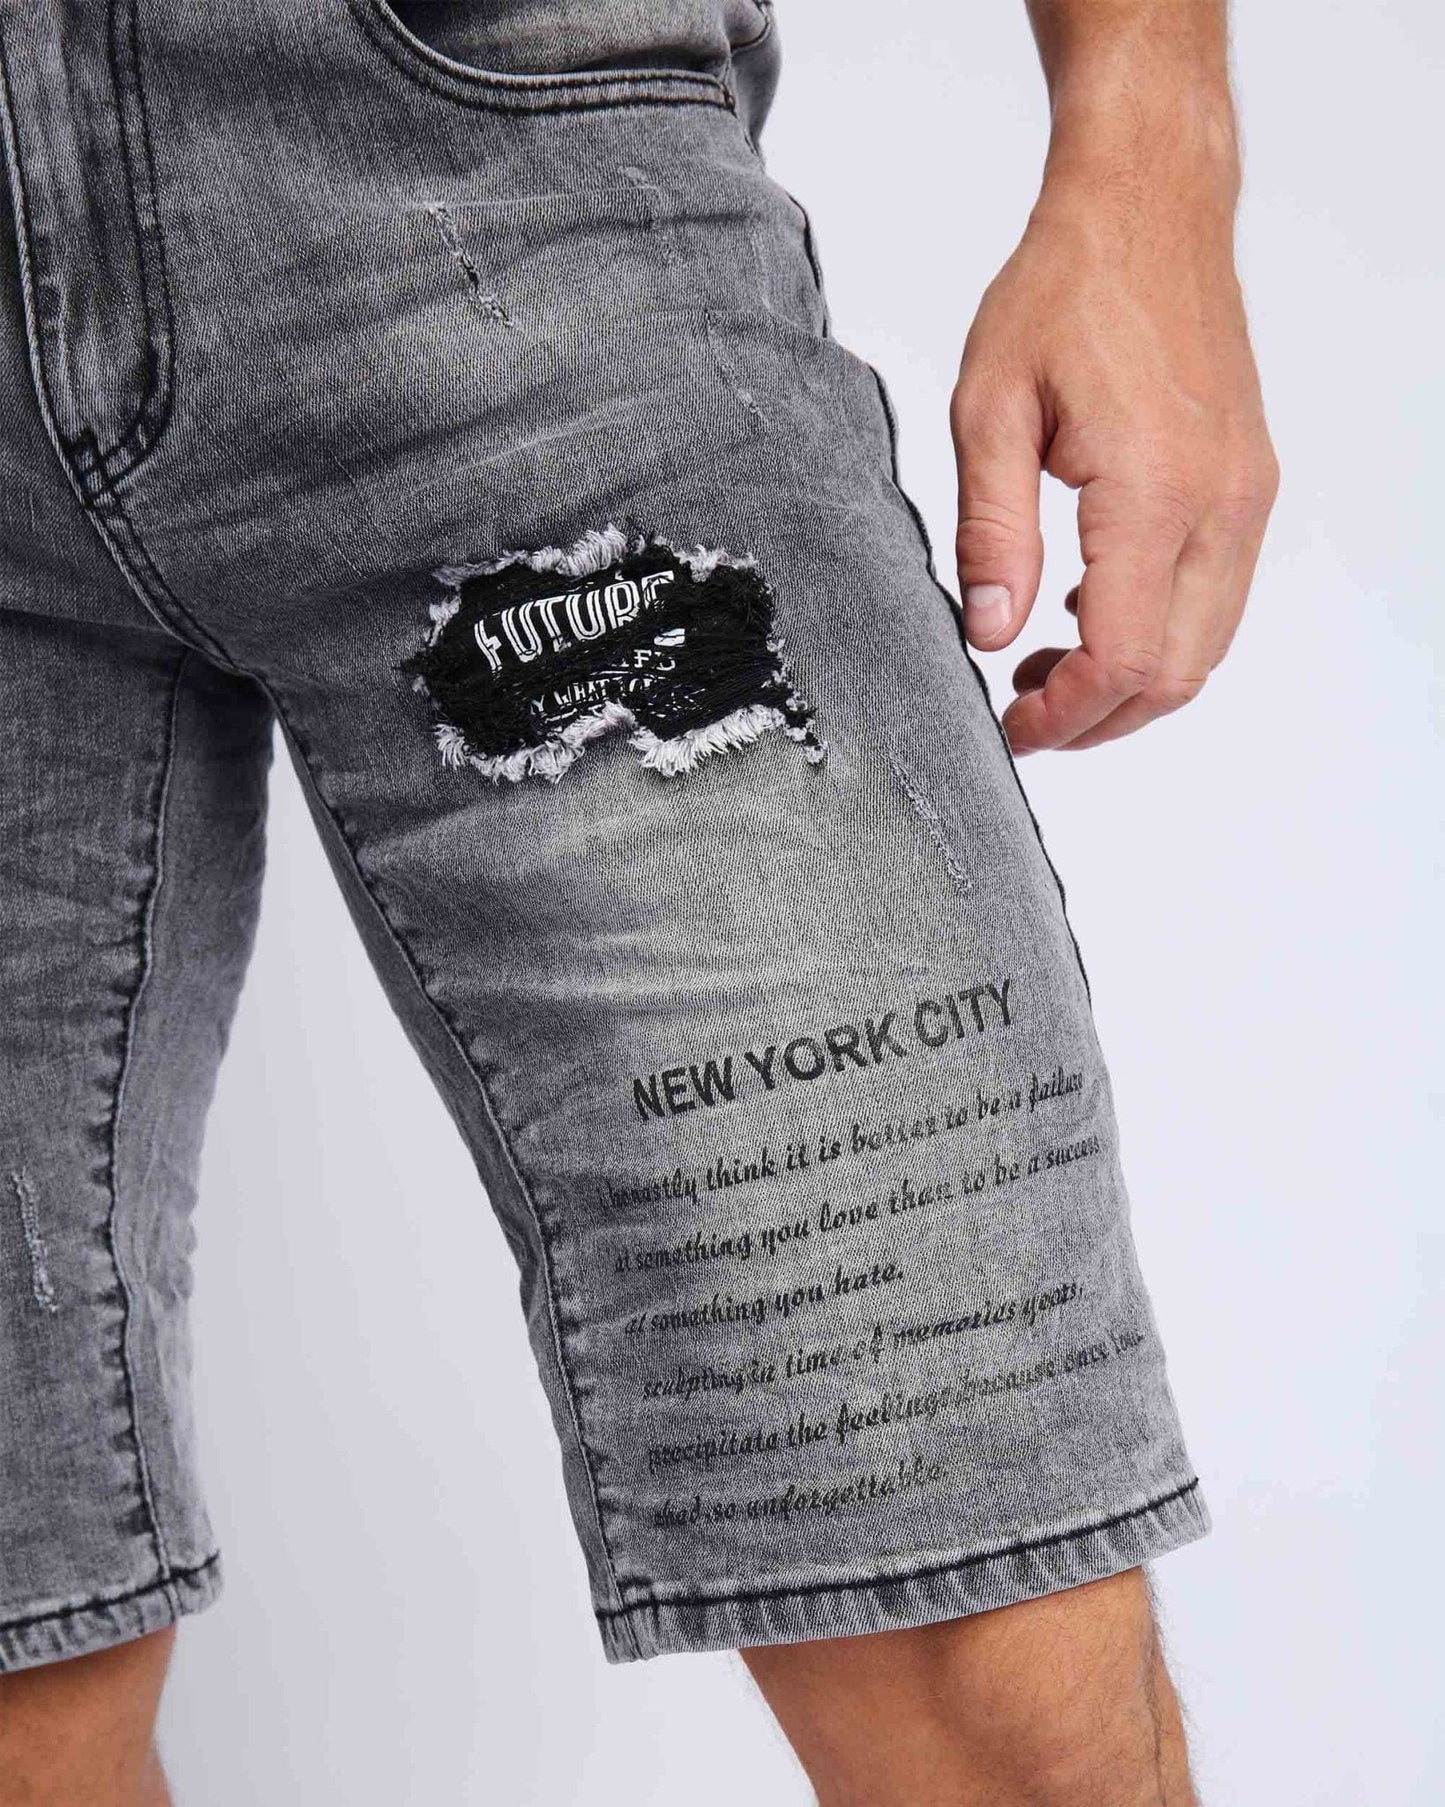 Printed Patch Ripped Black Jeans Shorts - CLASSY CLOSET BOUTIQUEPrinted Patch Ripped Black Jeans ShortsDenim Shorts79715300149667971530014966